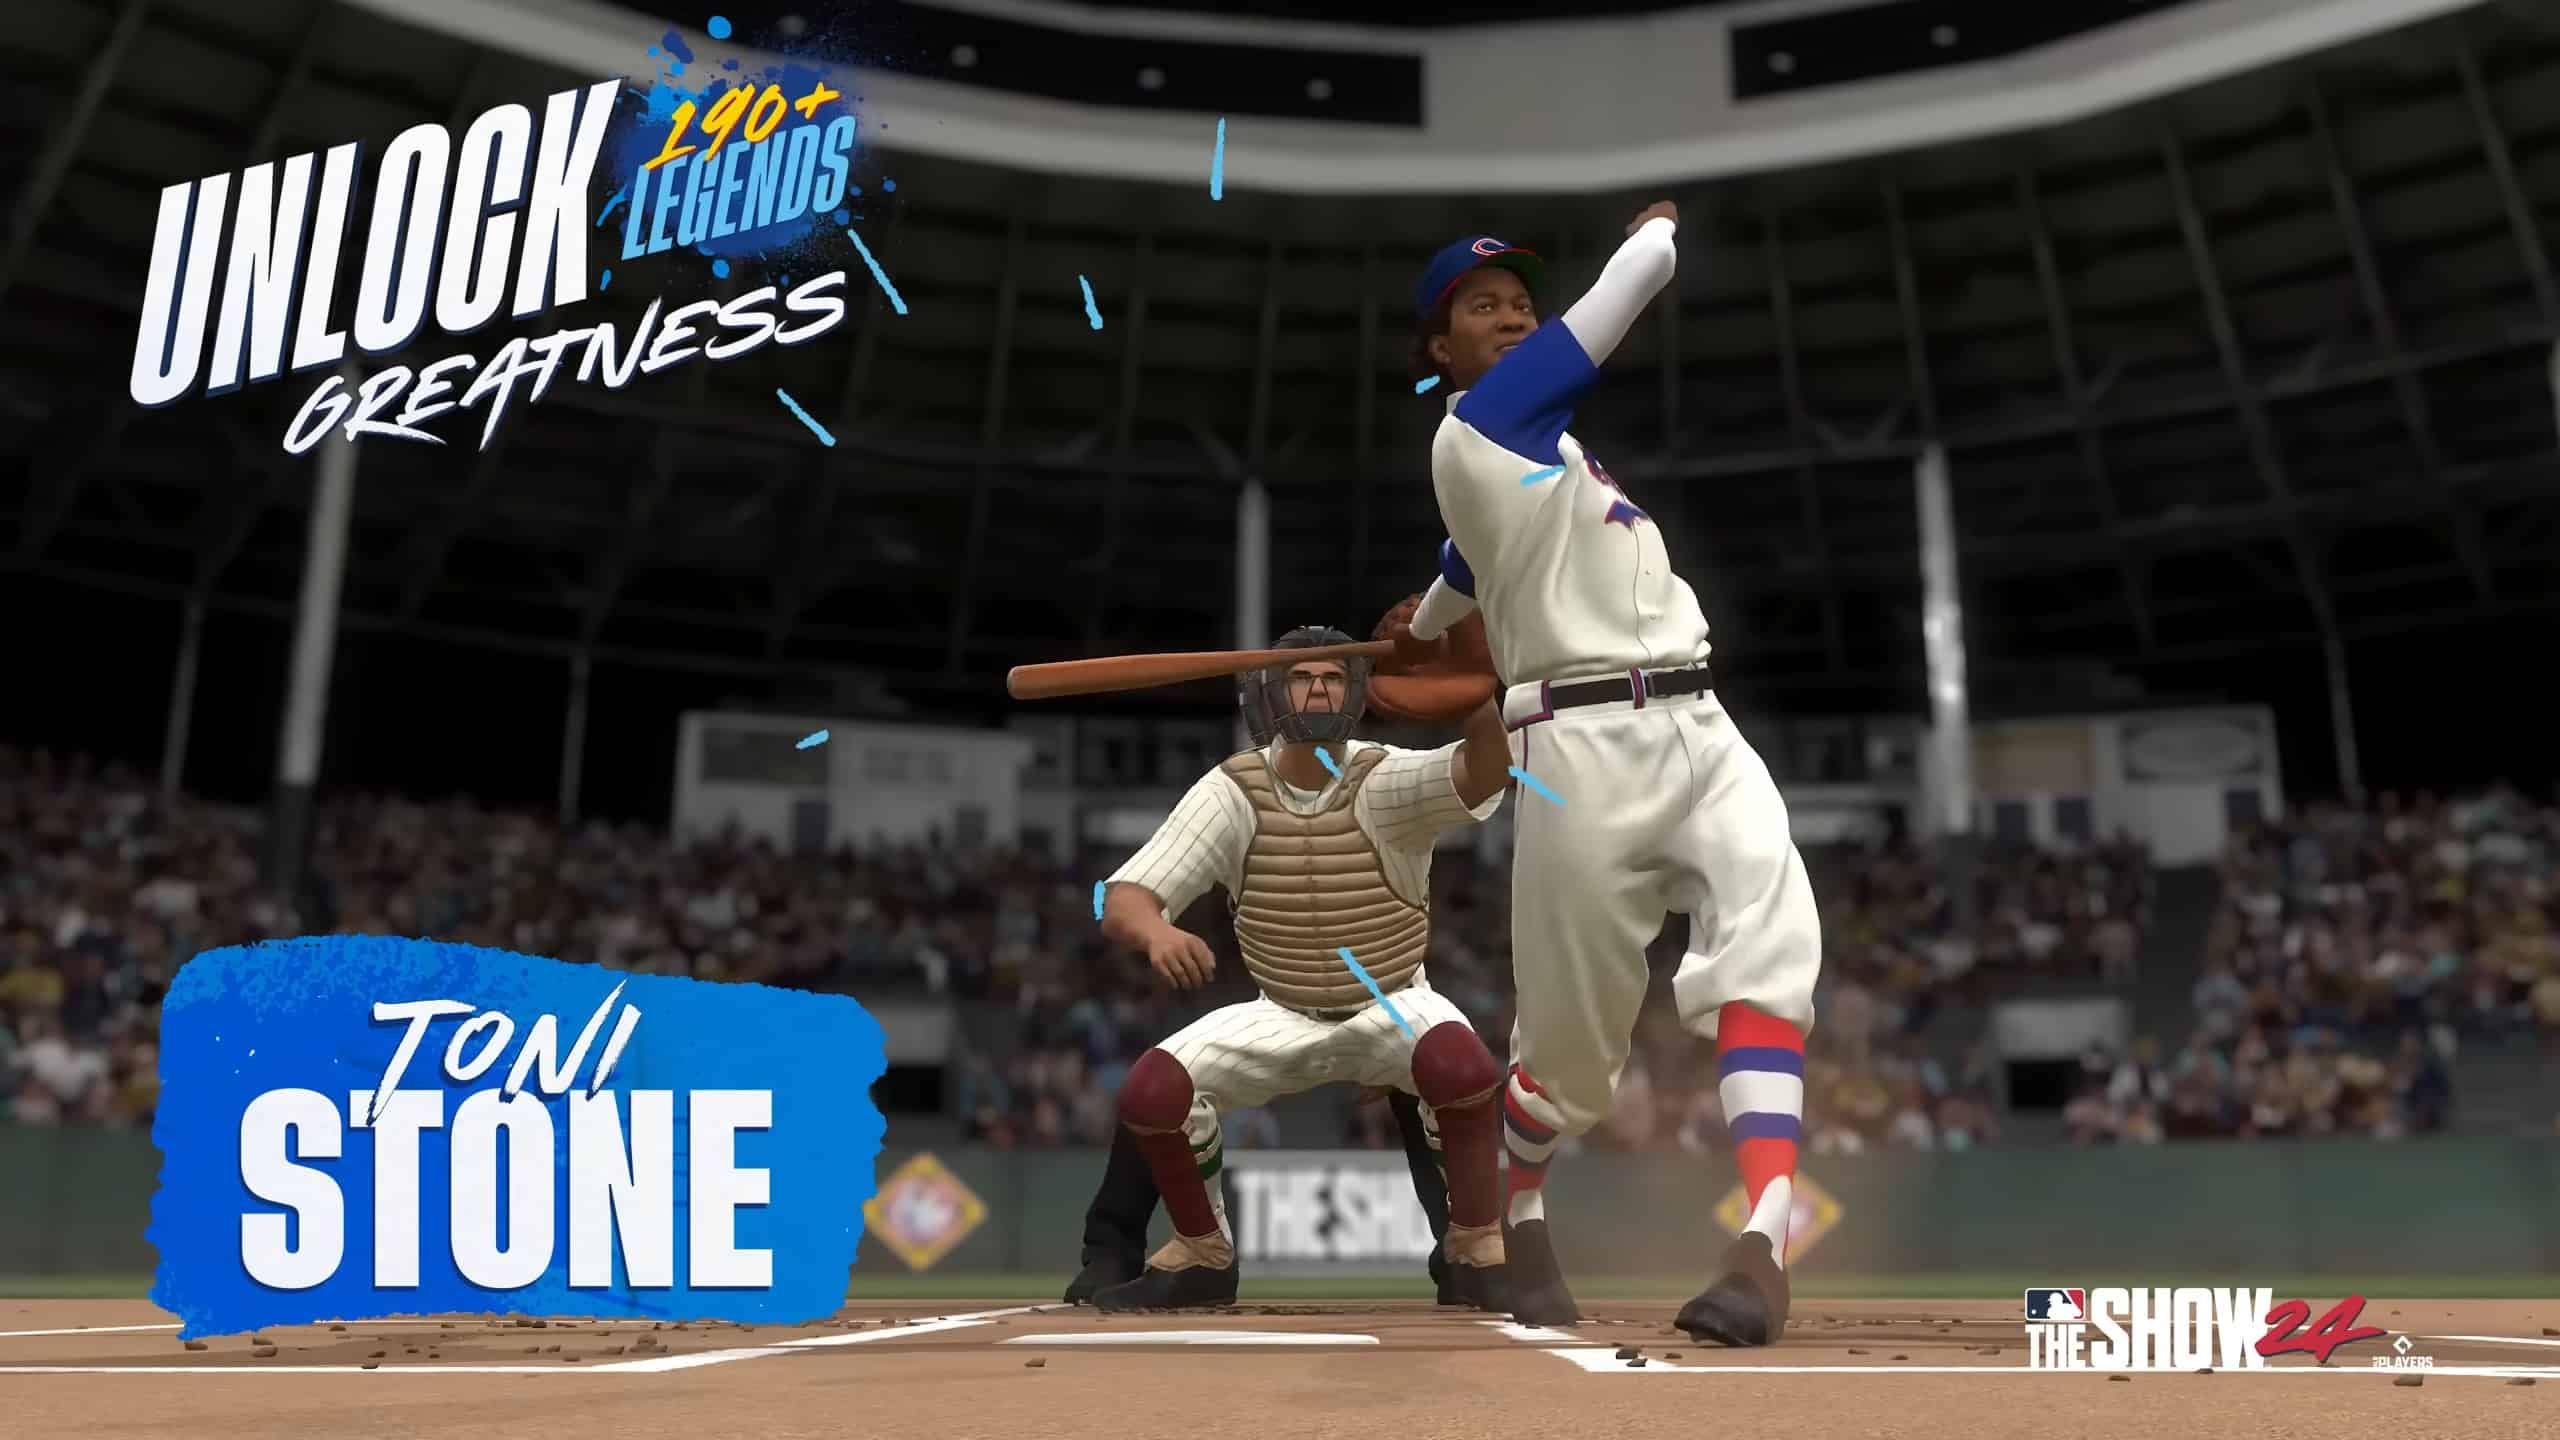 MLB The Show 24 new Legends: Toni Stone after hitting a ball.